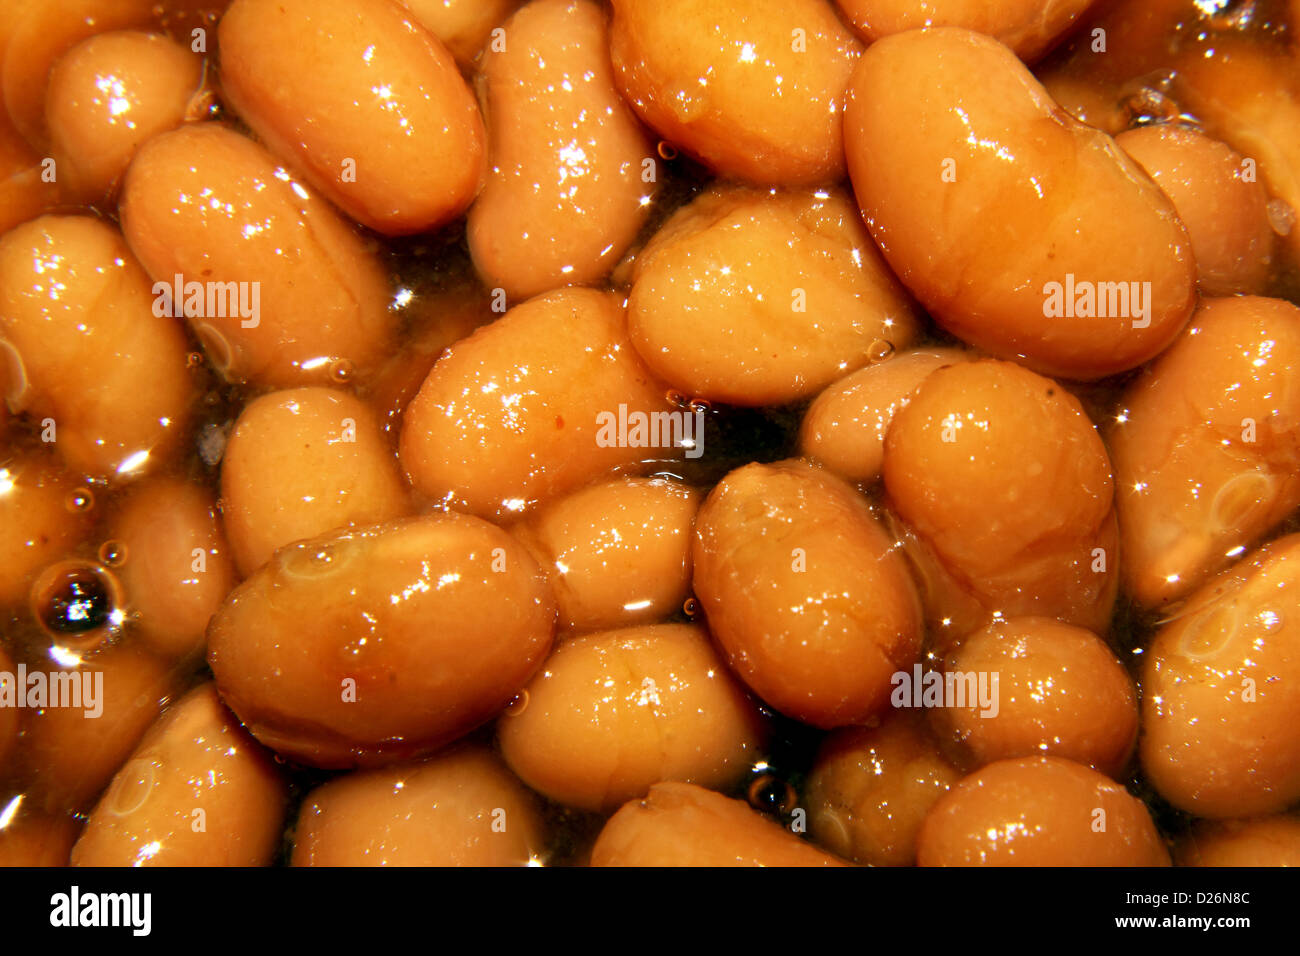 Savory and bubbling baked beans. Stock Photo